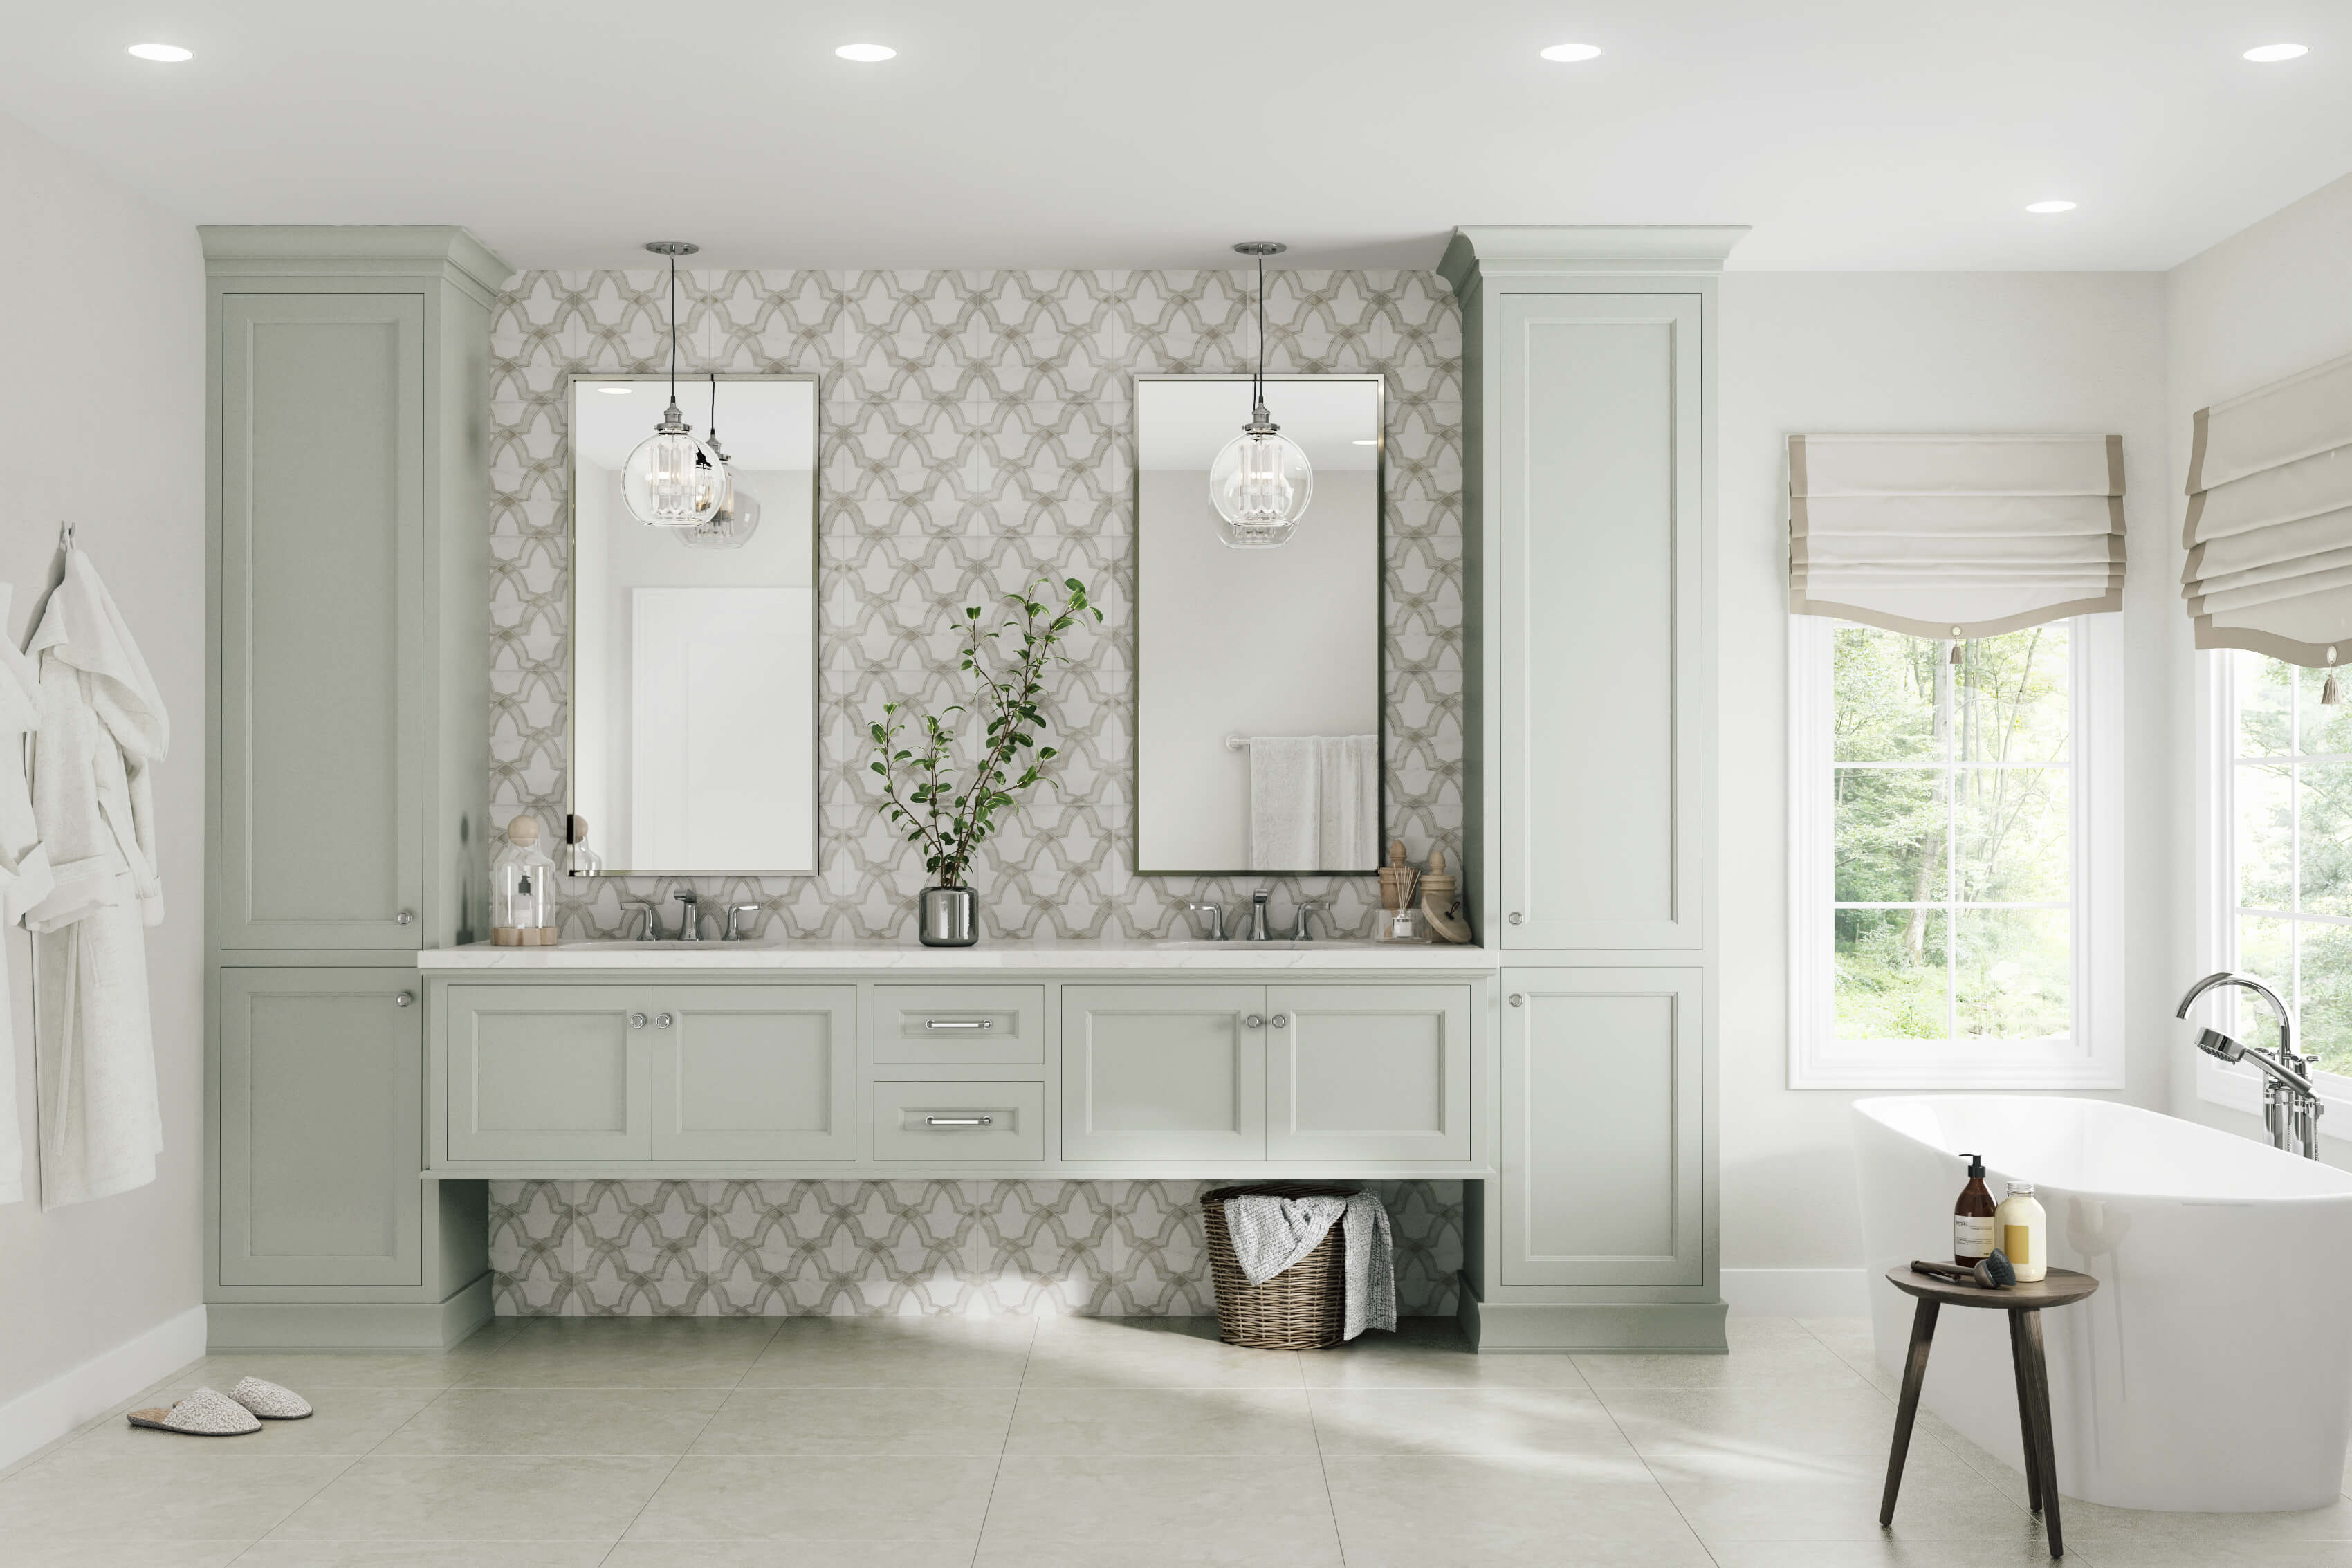 A transitional style master bathroom with a white and light gray color palette. A floating vanity in a soft gray painted finish is framed by two tall linen cabinets that stretch from the floor to the ceiling along with the floor-to-ceiling backsplash tiles. A freestanding bathtub sits near two large windows with views to the backyard.